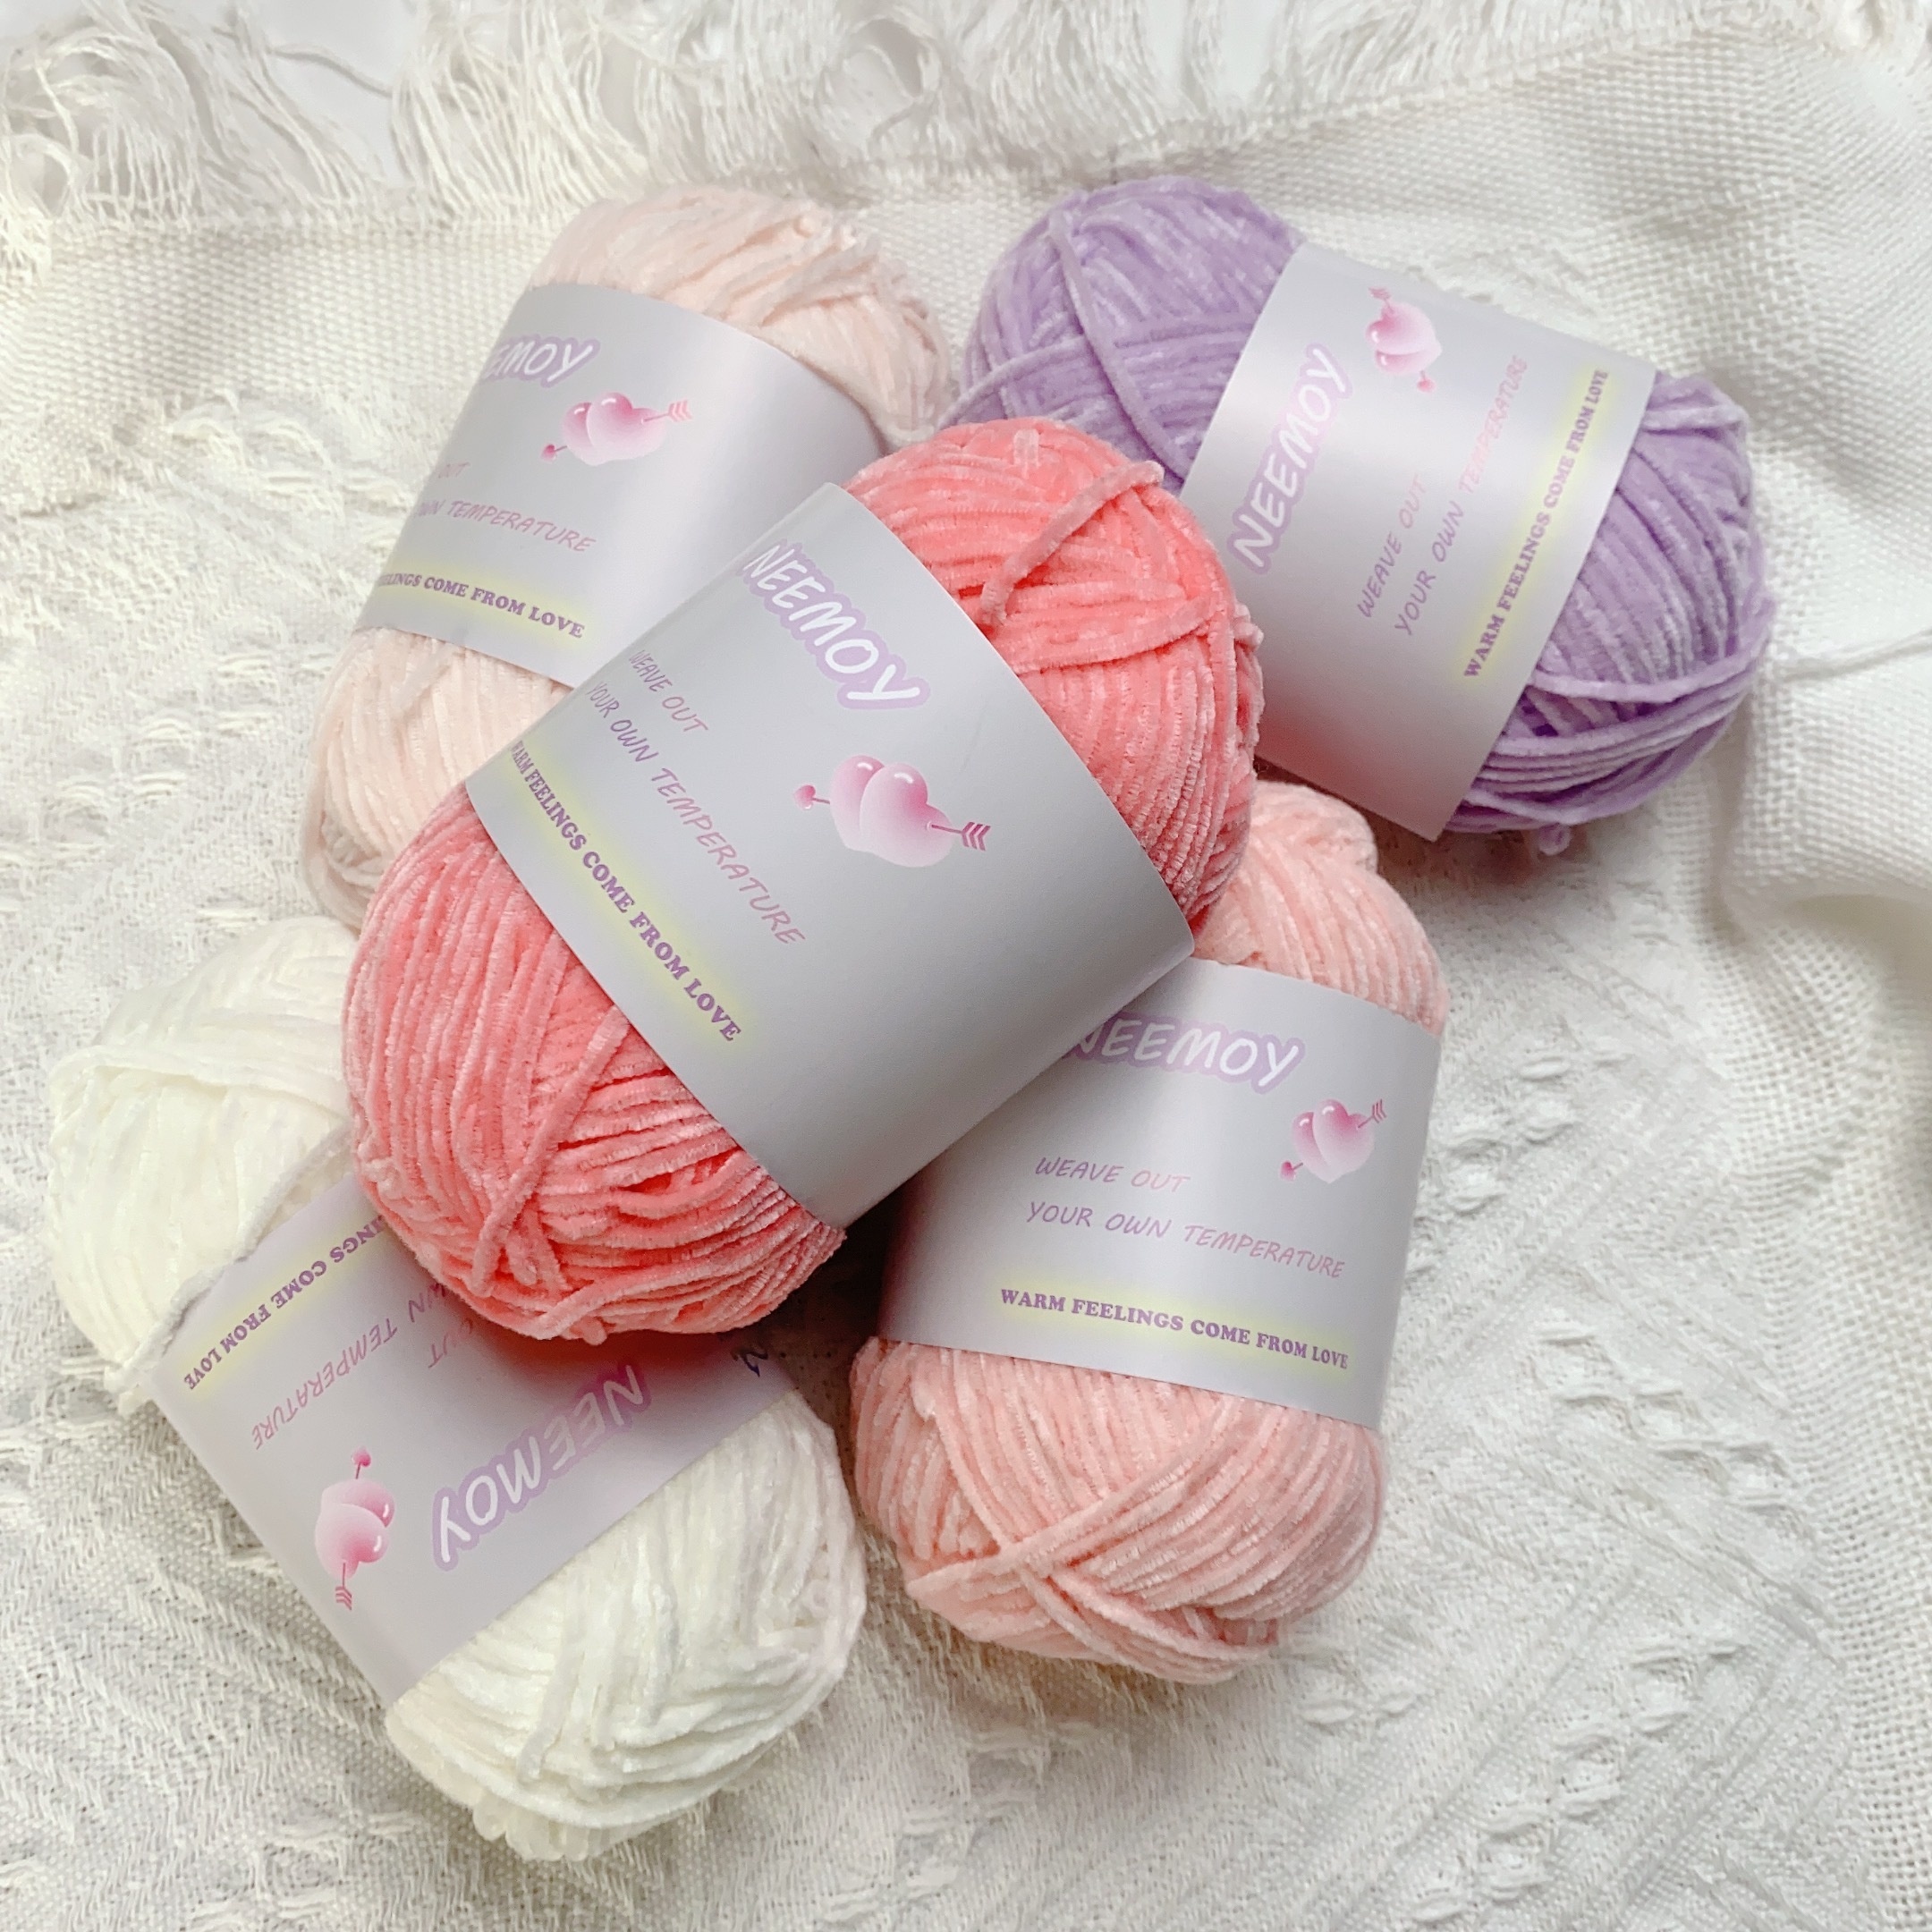 Crochet Yarn Skeins 165G Single Ply Chunky Crochet Yarn for Knitting and  Crafts Soft Knitted Yarn Sweater Scarf Crafting Woven Skeins Warm Wool Home